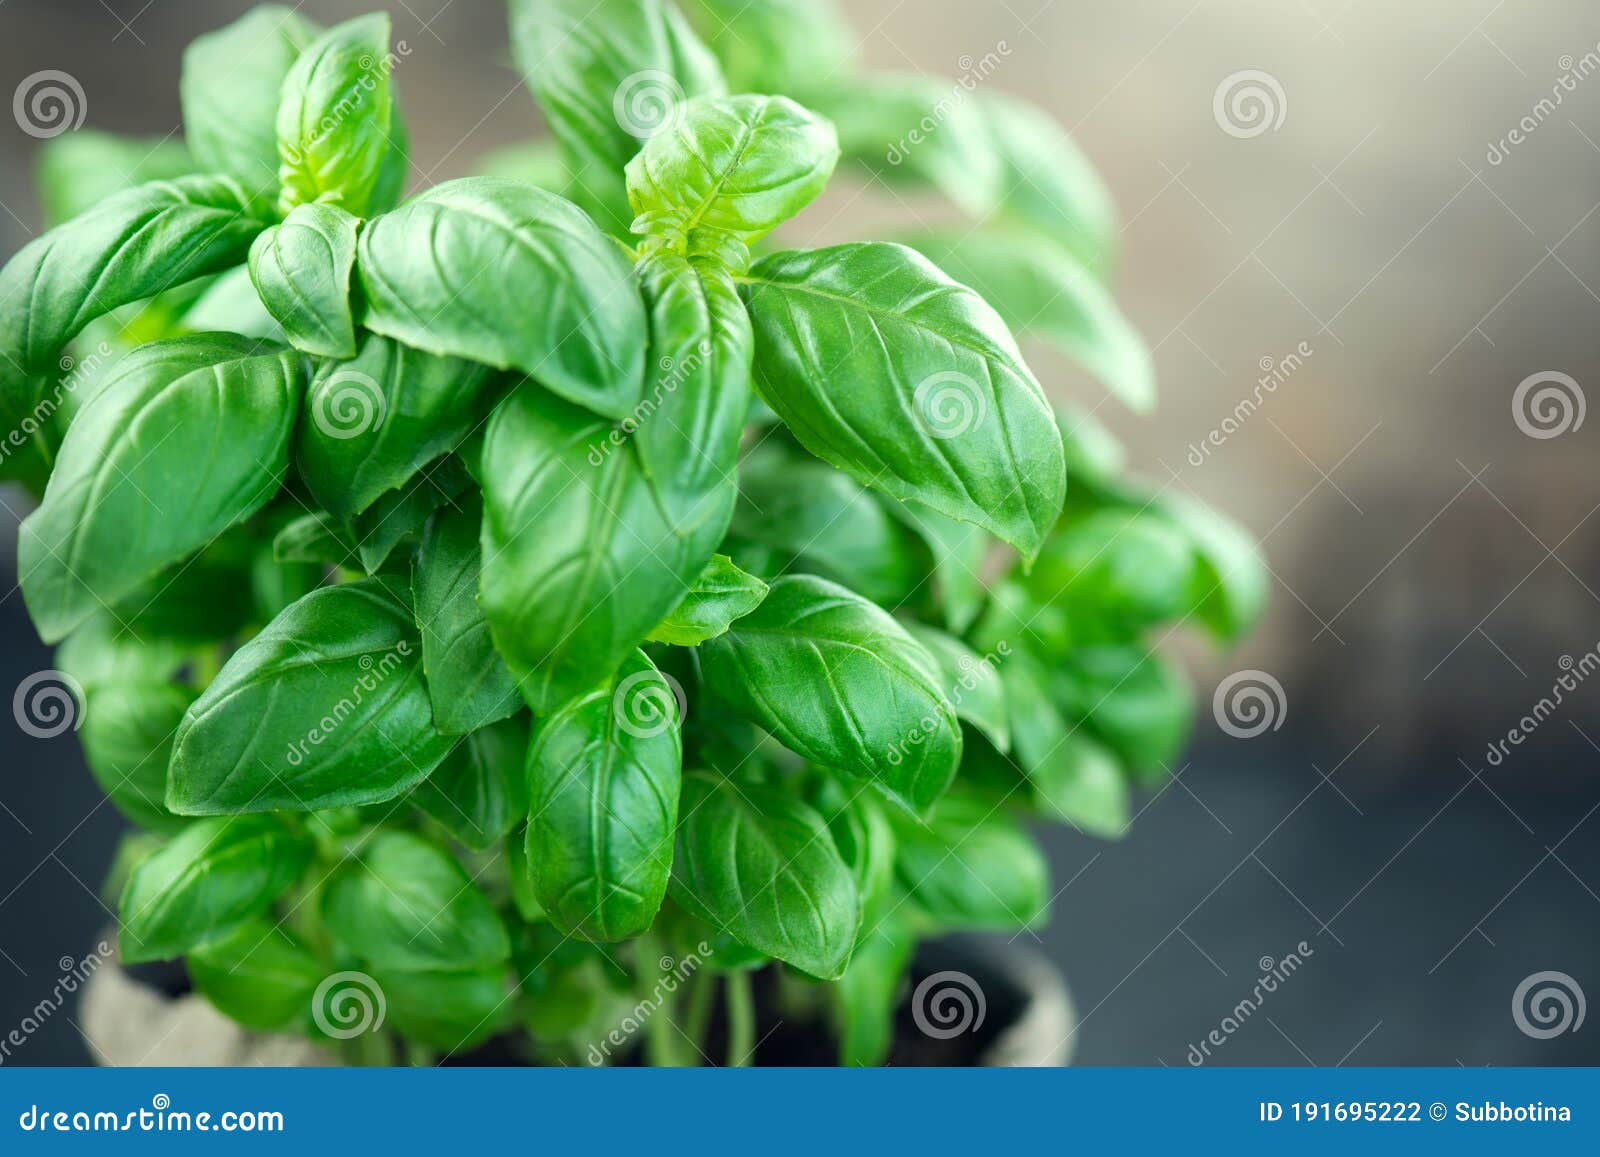 basil leaves in a bowl on dark rustic wooden table green flavoring outdoor. fresh basil. nature healthy. condiment